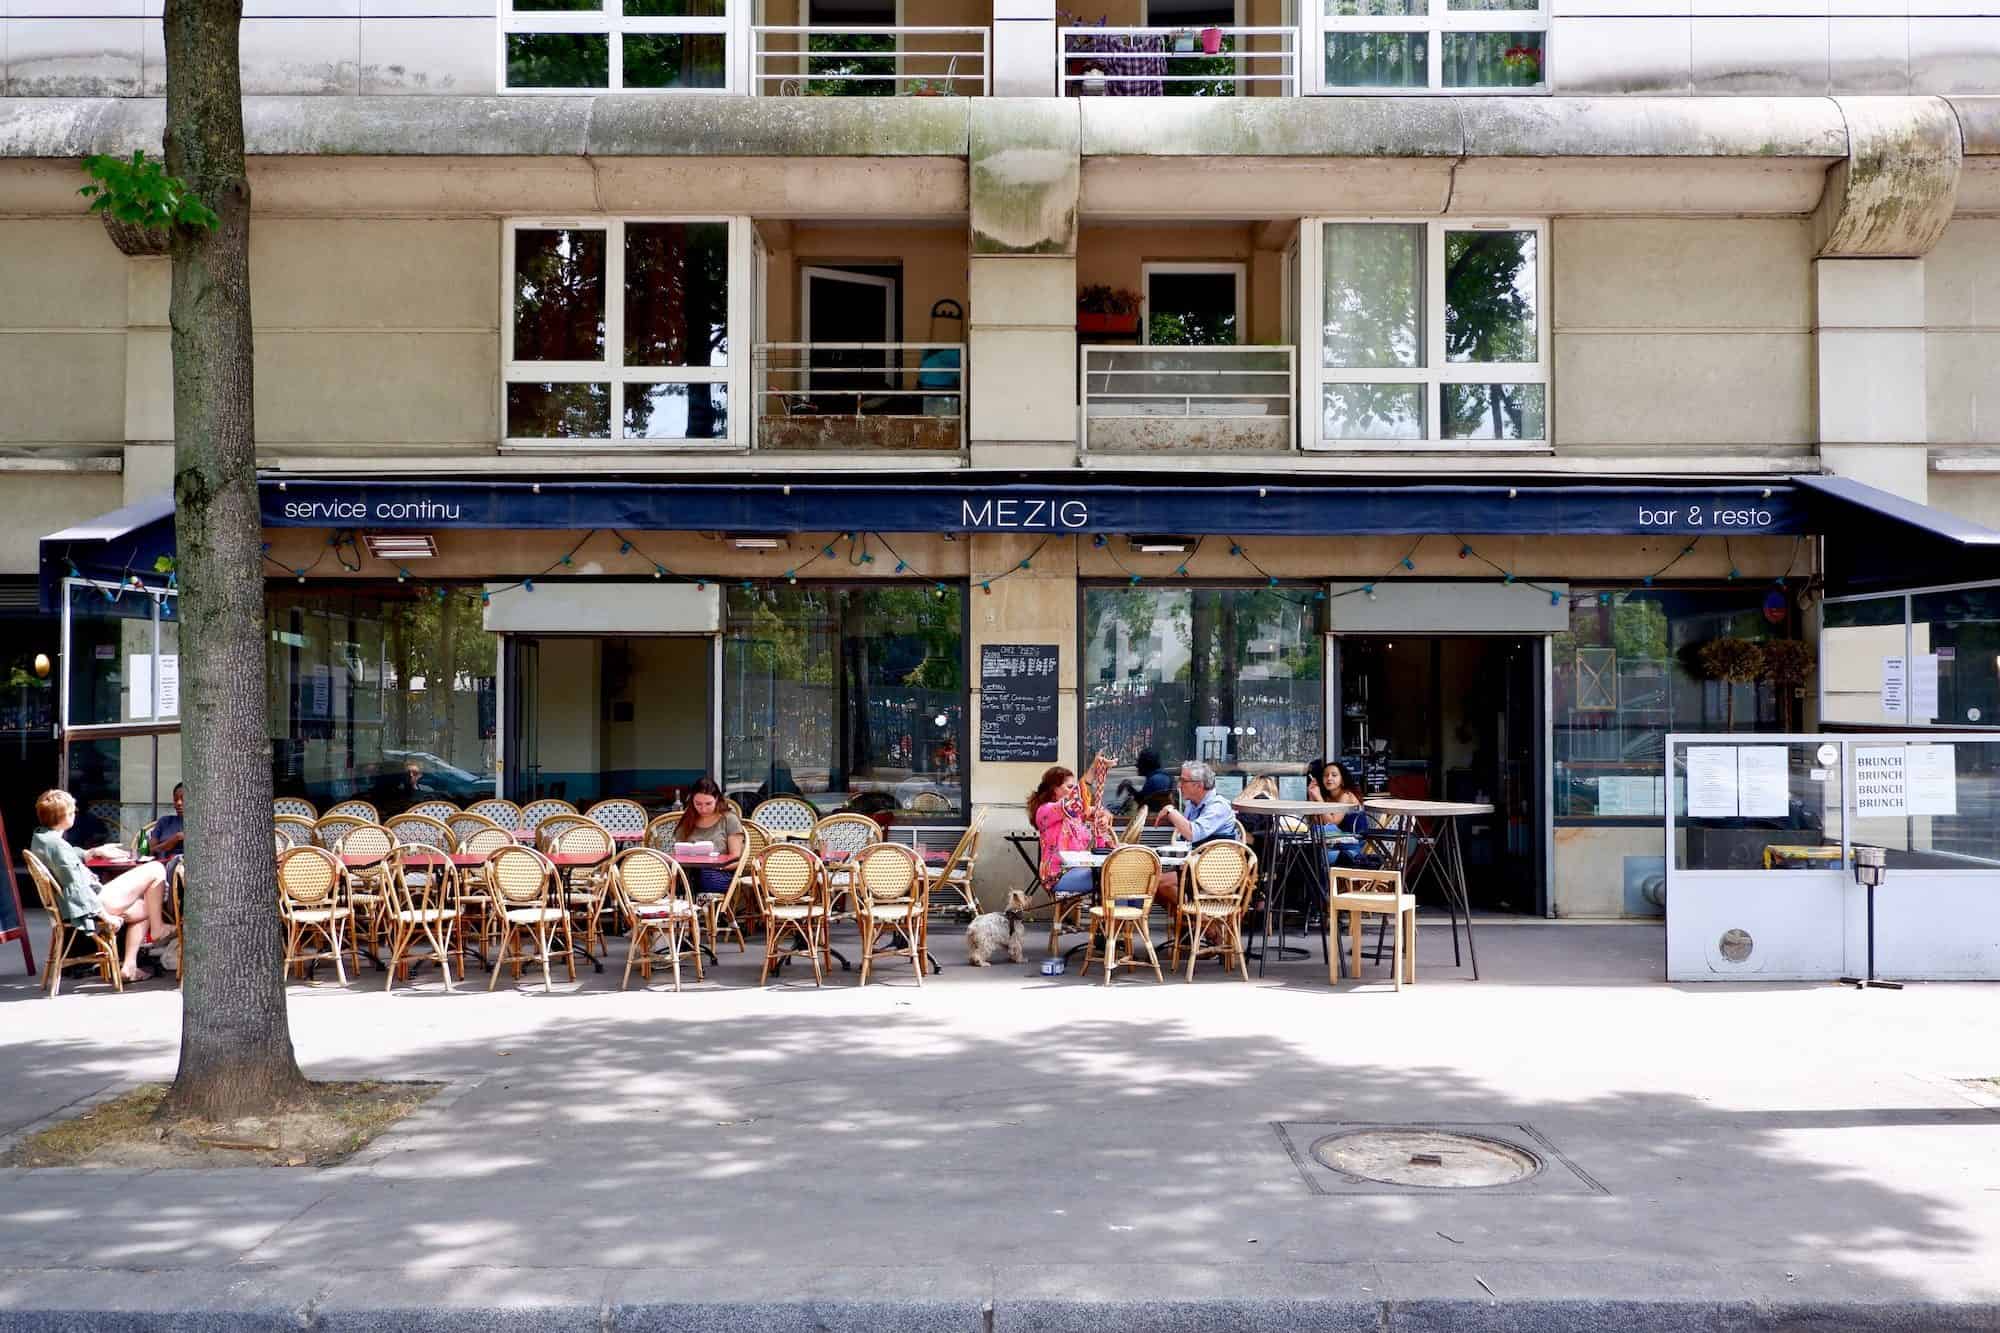 Mezig restaurant close to the canal in Paris with its sunny terrace.